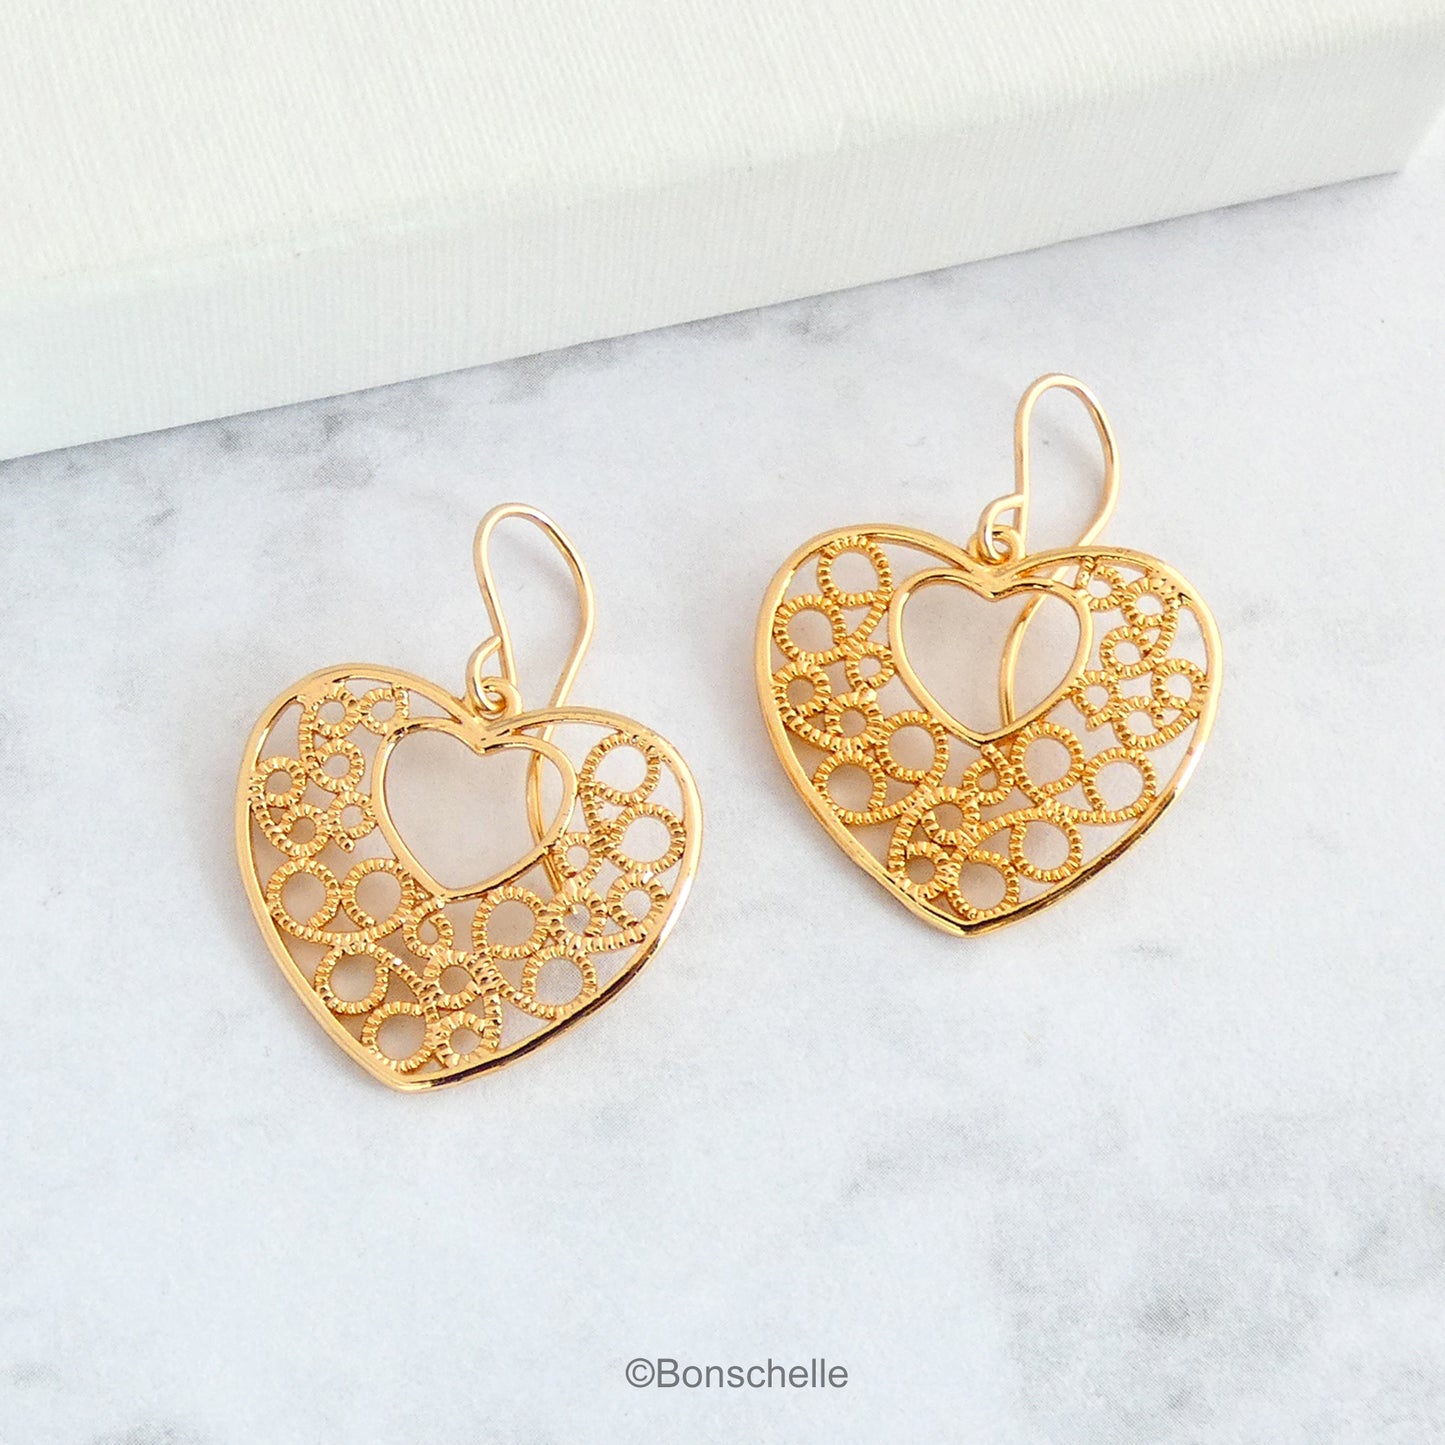 18K gold plated filigree heart earrings with 14K gold filled earwires shown on a surface